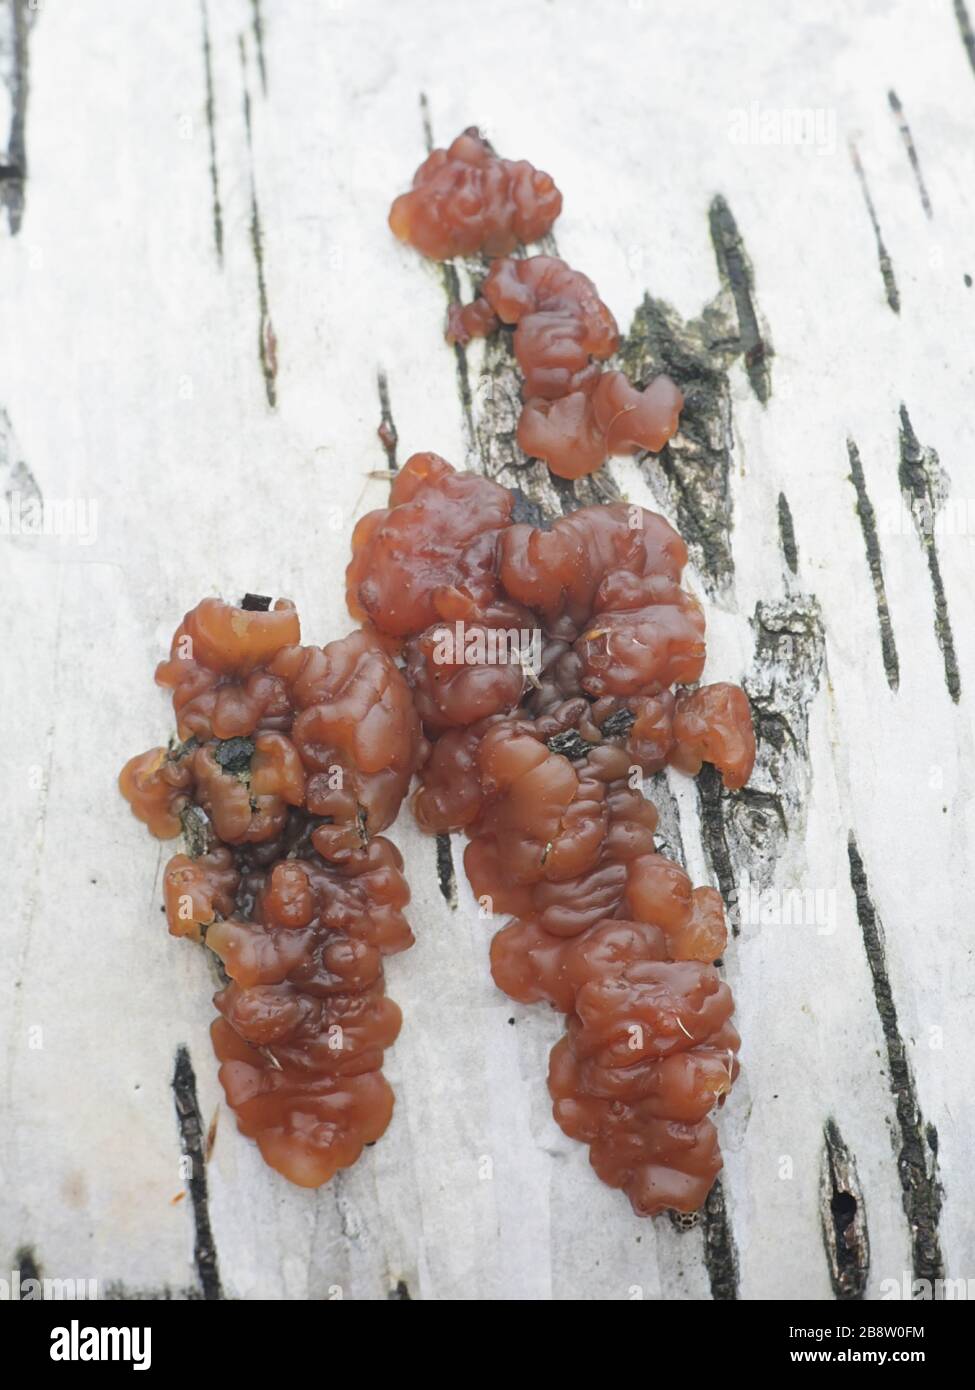 Exidia repanda, commonly known as the Birch Jelly fungus, wild mushrooms from Finland Stock Photo